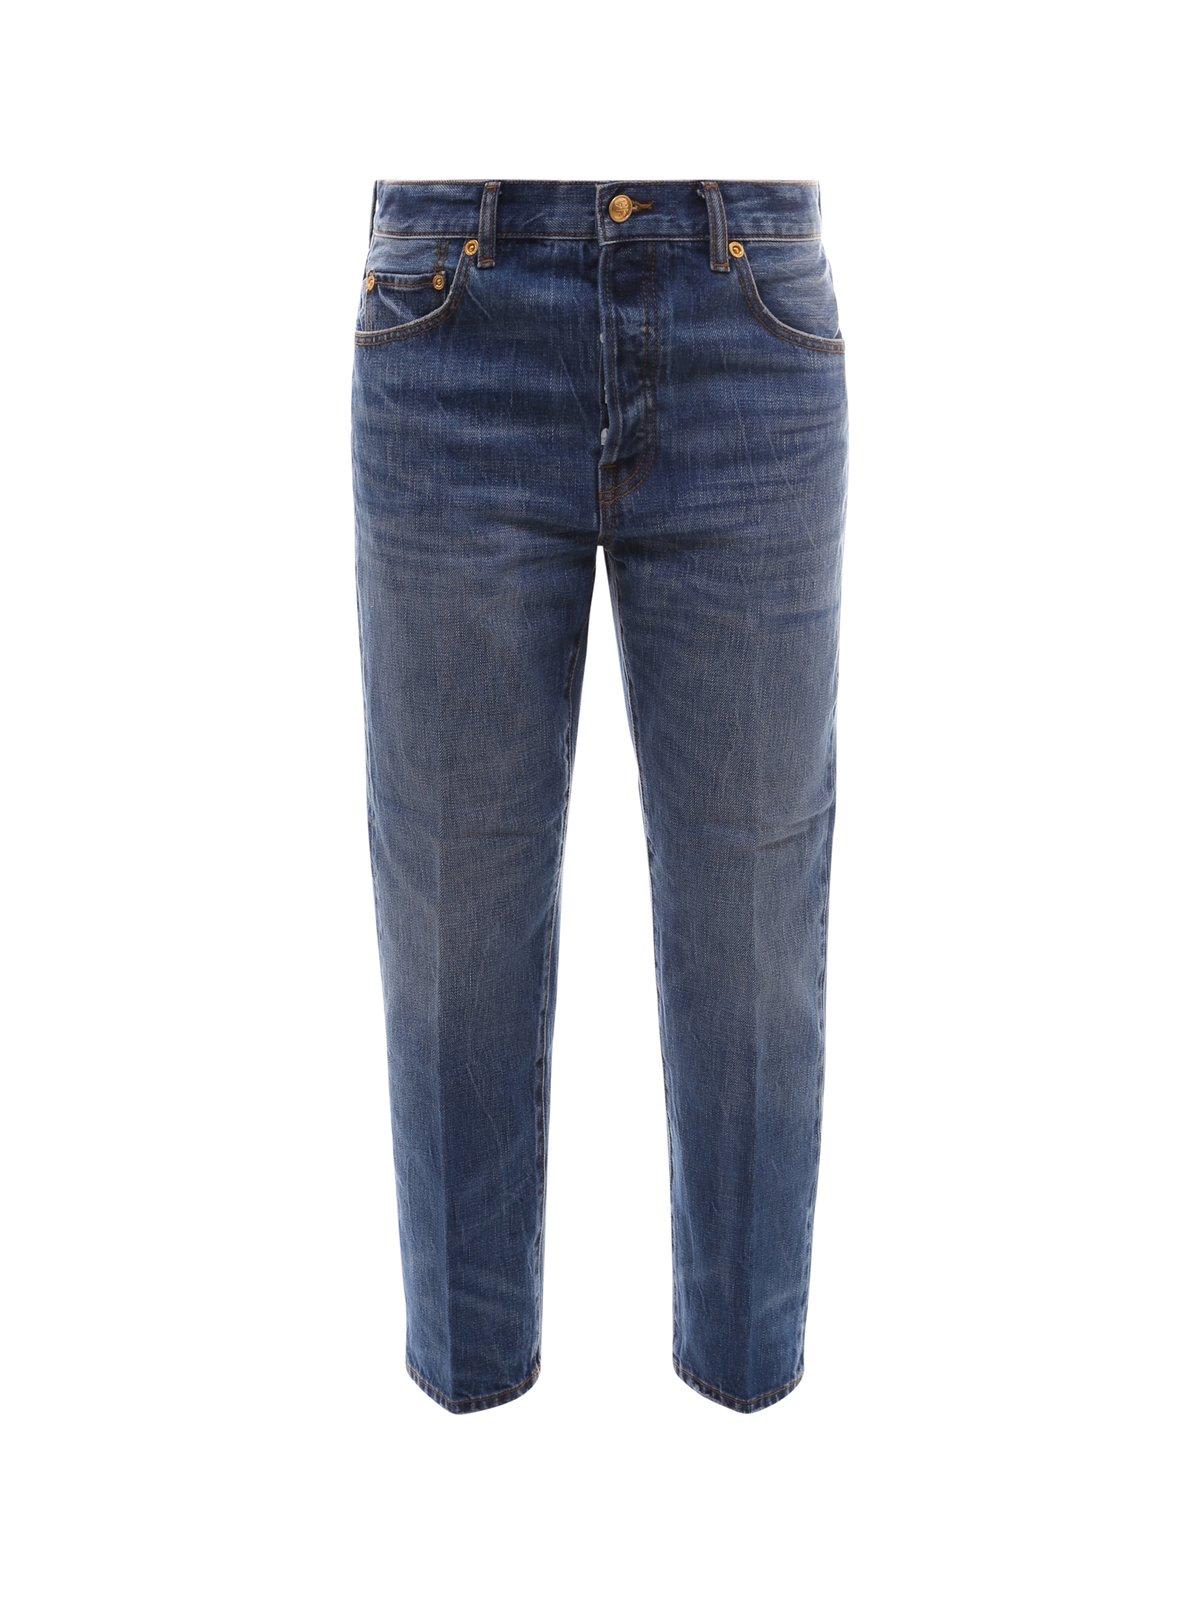 Tory Burch High-rise Cropped Jeans